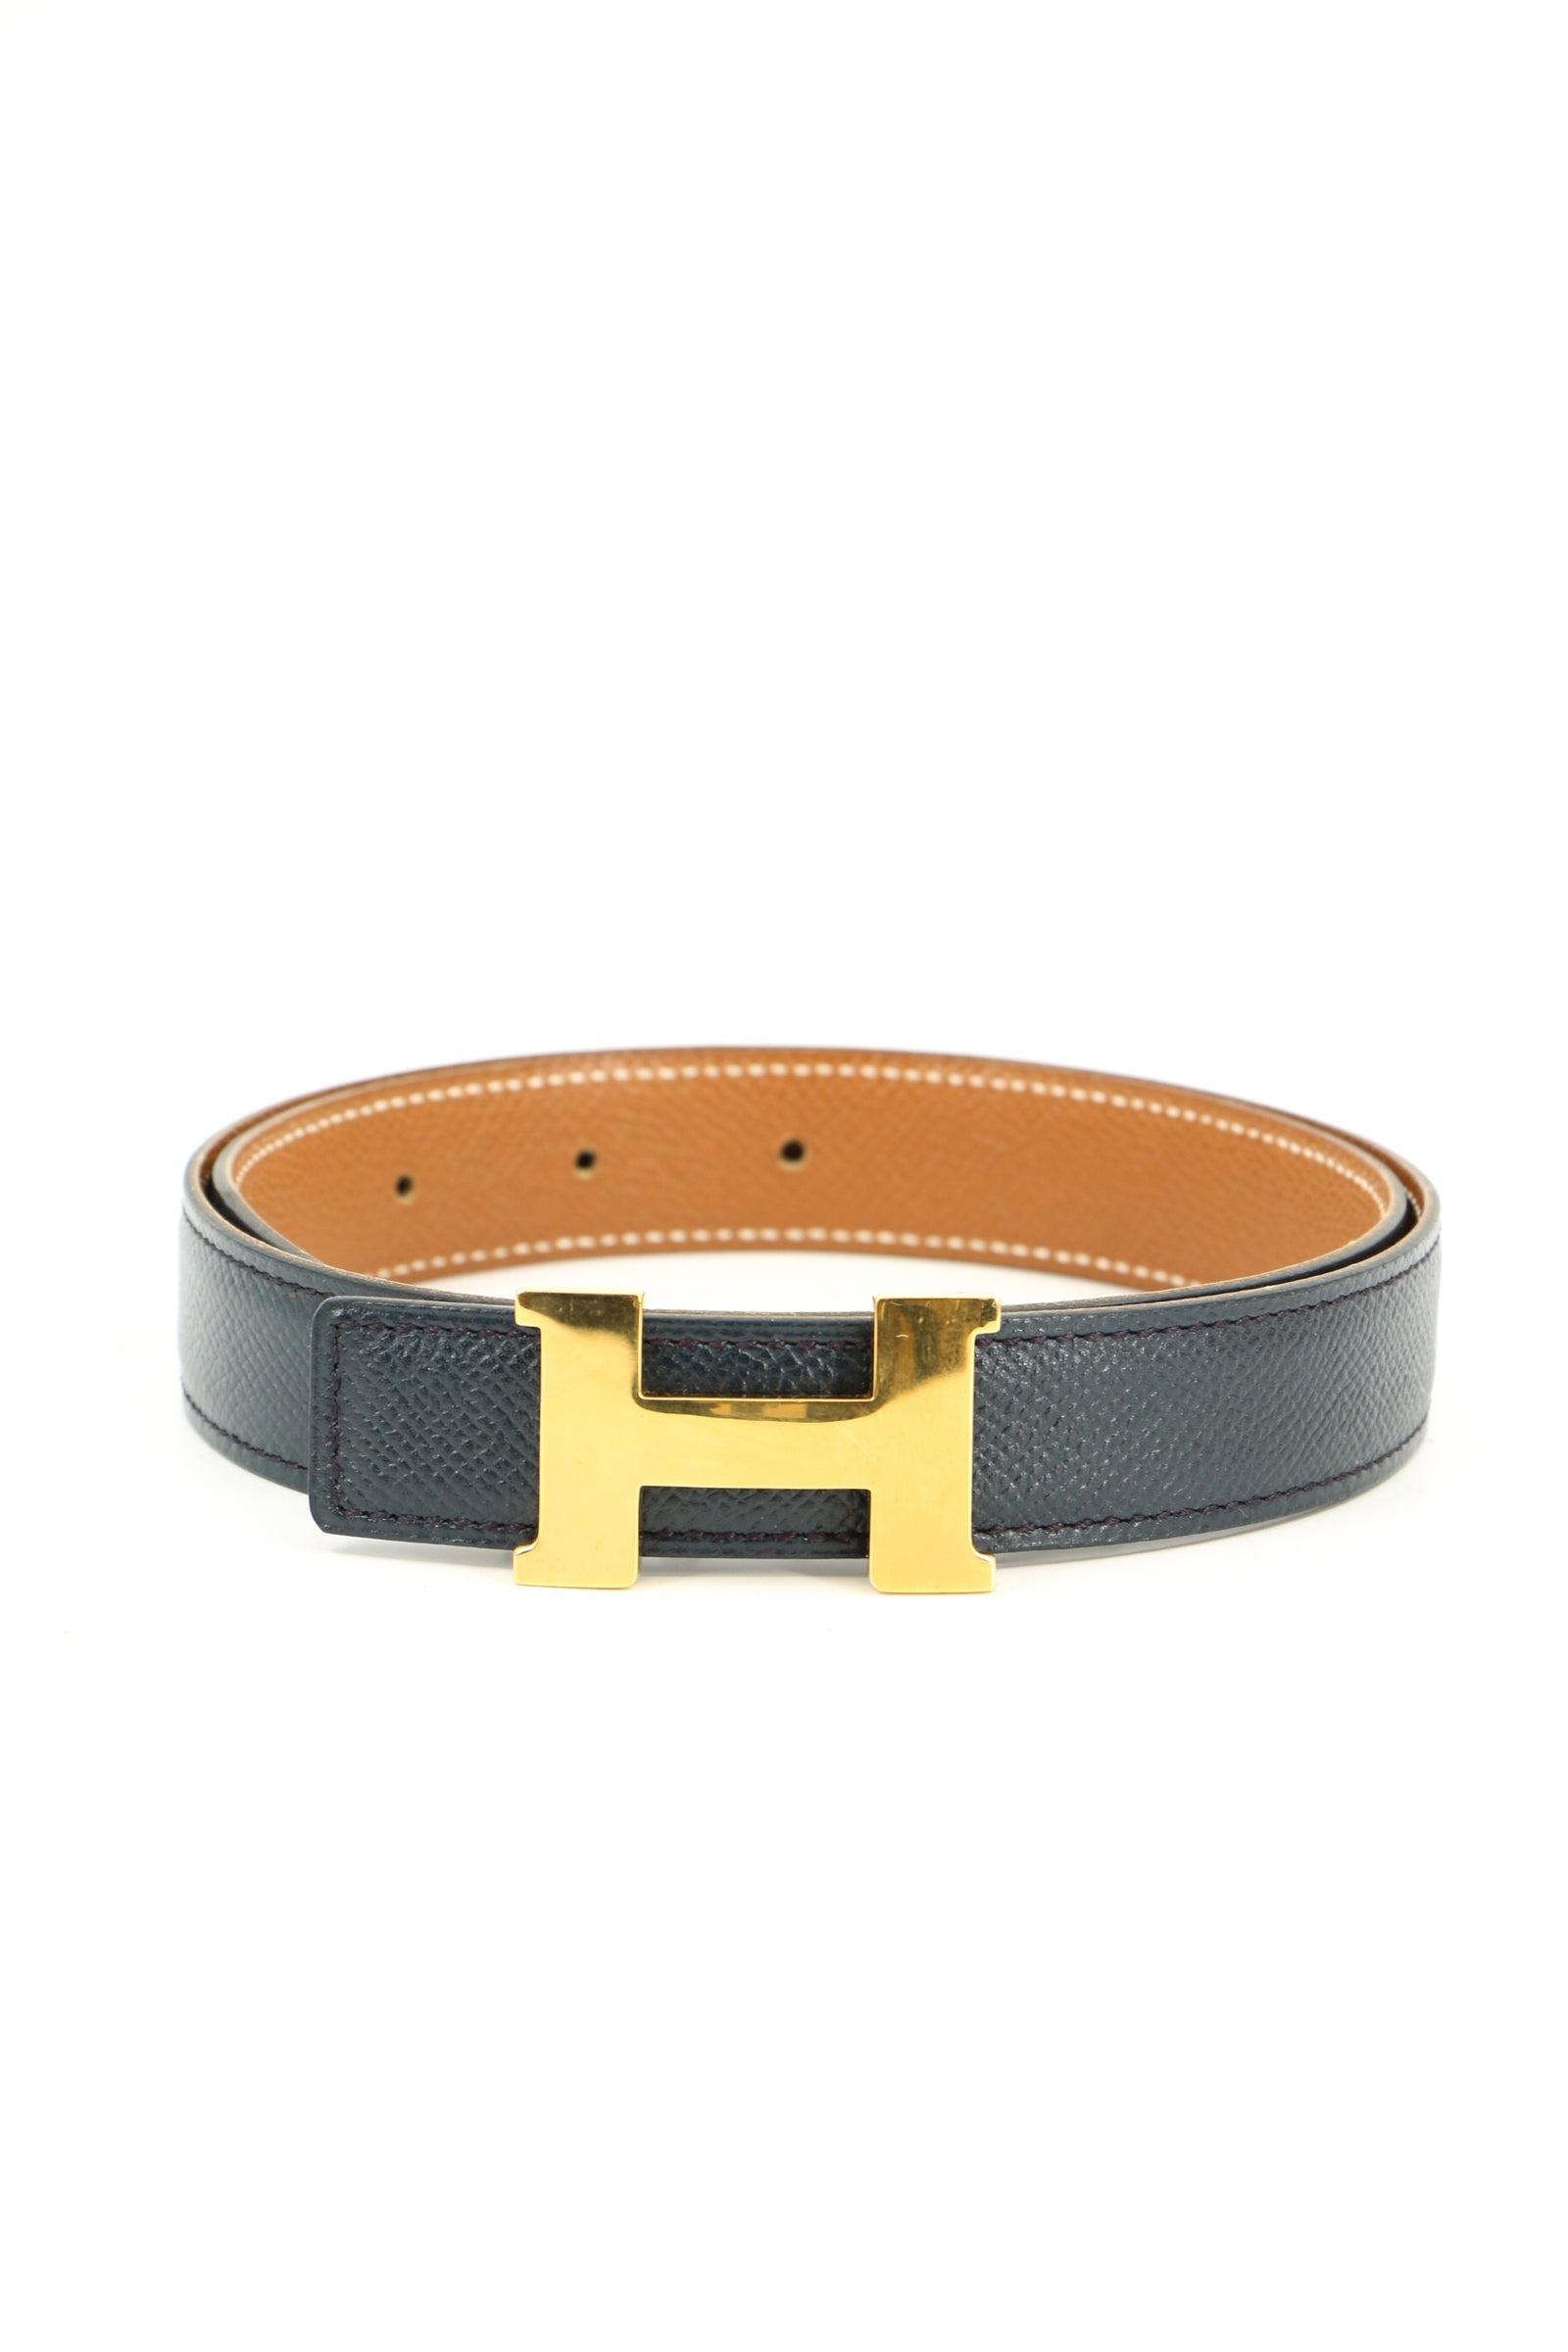 Louis Vuitton - Authenticated Belt - Leather Green Plain for Women, Very Good Condition